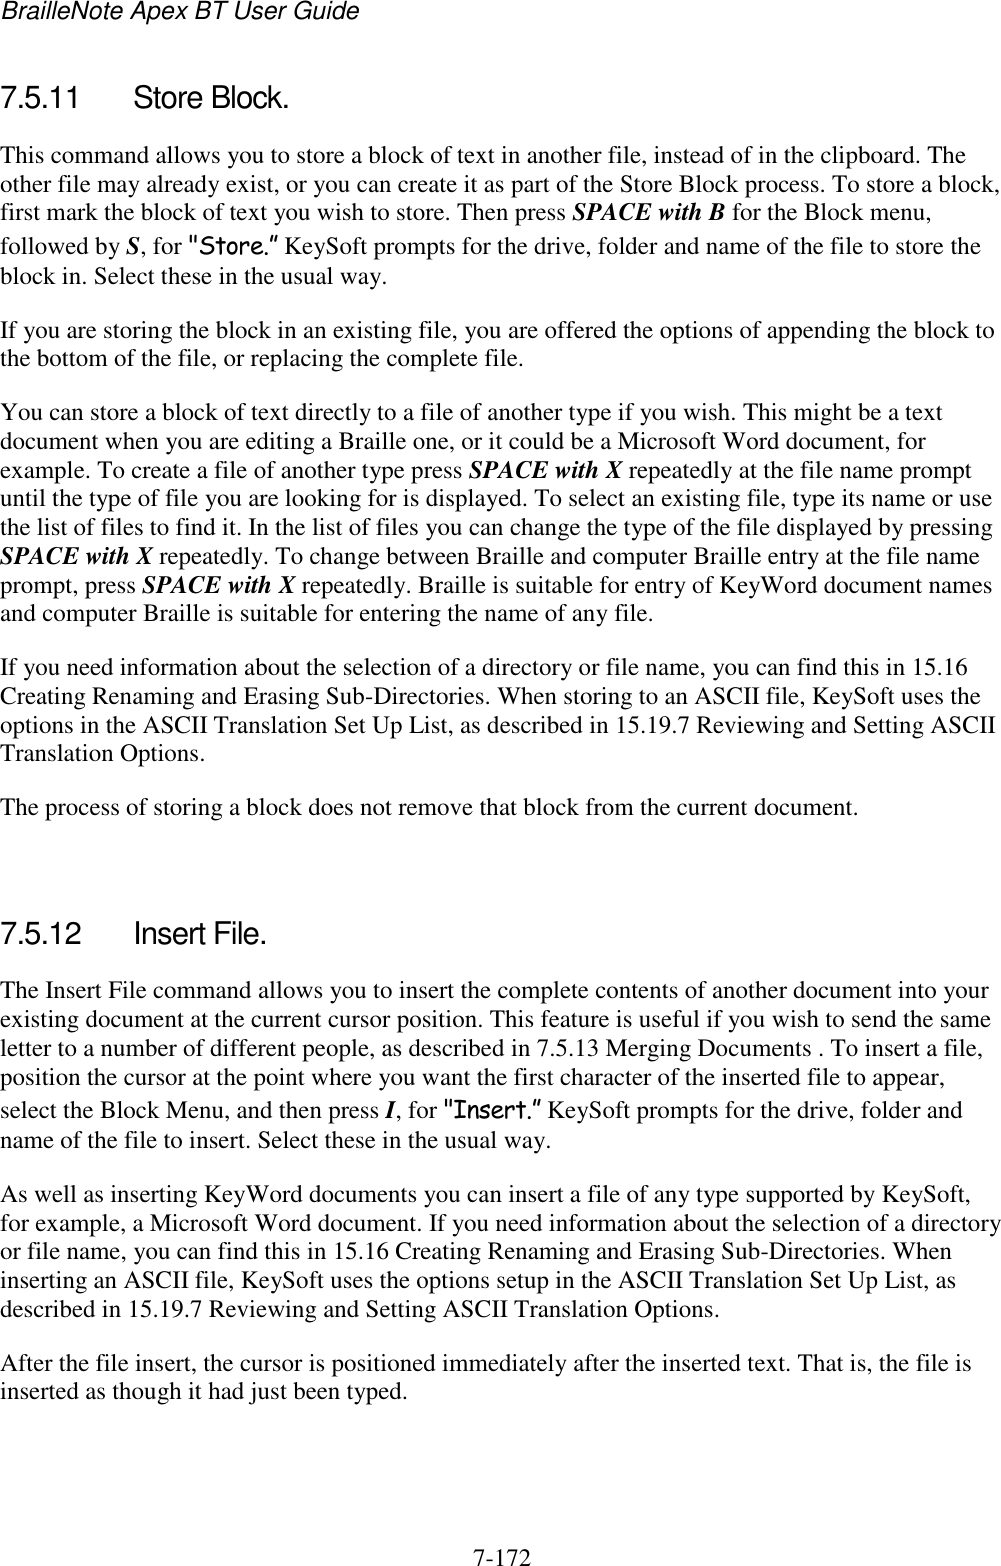 BrailleNote Apex BT User Guide   7-172   7.5.11  Store Block. This command allows you to store a block of text in another file, instead of in the clipboard. The other file may already exist, or you can create it as part of the Store Block process. To store a block, first mark the block of text you wish to store. Then press SPACE with B for the Block menu, followed by S, for &quot;Store.” KeySoft prompts for the drive, folder and name of the file to store the block in. Select these in the usual way. If you are storing the block in an existing file, you are offered the options of appending the block to the bottom of the file, or replacing the complete file. You can store a block of text directly to a file of another type if you wish. This might be a text document when you are editing a Braille one, or it could be a Microsoft Word document, for example. To create a file of another type press SPACE with X repeatedly at the file name prompt until the type of file you are looking for is displayed. To select an existing file, type its name or use the list of files to find it. In the list of files you can change the type of the file displayed by pressing SPACE with X repeatedly. To change between Braille and computer Braille entry at the file name prompt, press SPACE with X repeatedly. Braille is suitable for entry of KeyWord document names and computer Braille is suitable for entering the name of any file. If you need information about the selection of a directory or file name, you can find this in 15.16 Creating Renaming and Erasing Sub-Directories. When storing to an ASCII file, KeySoft uses the options in the ASCII Translation Set Up List, as described in 15.19.7 Reviewing and Setting ASCII Translation Options. The process of storing a block does not remove that block from the current document.   7.5.12  Insert File. The Insert File command allows you to insert the complete contents of another document into your existing document at the current cursor position. This feature is useful if you wish to send the same letter to a number of different people, as described in 7.5.13 Merging Documents . To insert a file, position the cursor at the point where you want the first character of the inserted file to appear, select the Block Menu, and then press I, for &quot;Insert.” KeySoft prompts for the drive, folder and name of the file to insert. Select these in the usual way. As well as inserting KeyWord documents you can insert a file of any type supported by KeySoft, for example, a Microsoft Word document. If you need information about the selection of a directory or file name, you can find this in 15.16 Creating Renaming and Erasing Sub-Directories. When inserting an ASCII file, KeySoft uses the options setup in the ASCII Translation Set Up List, as described in 15.19.7 Reviewing and Setting ASCII Translation Options. After the file insert, the cursor is positioned immediately after the inserted text. That is, the file is inserted as though it had just been typed.   